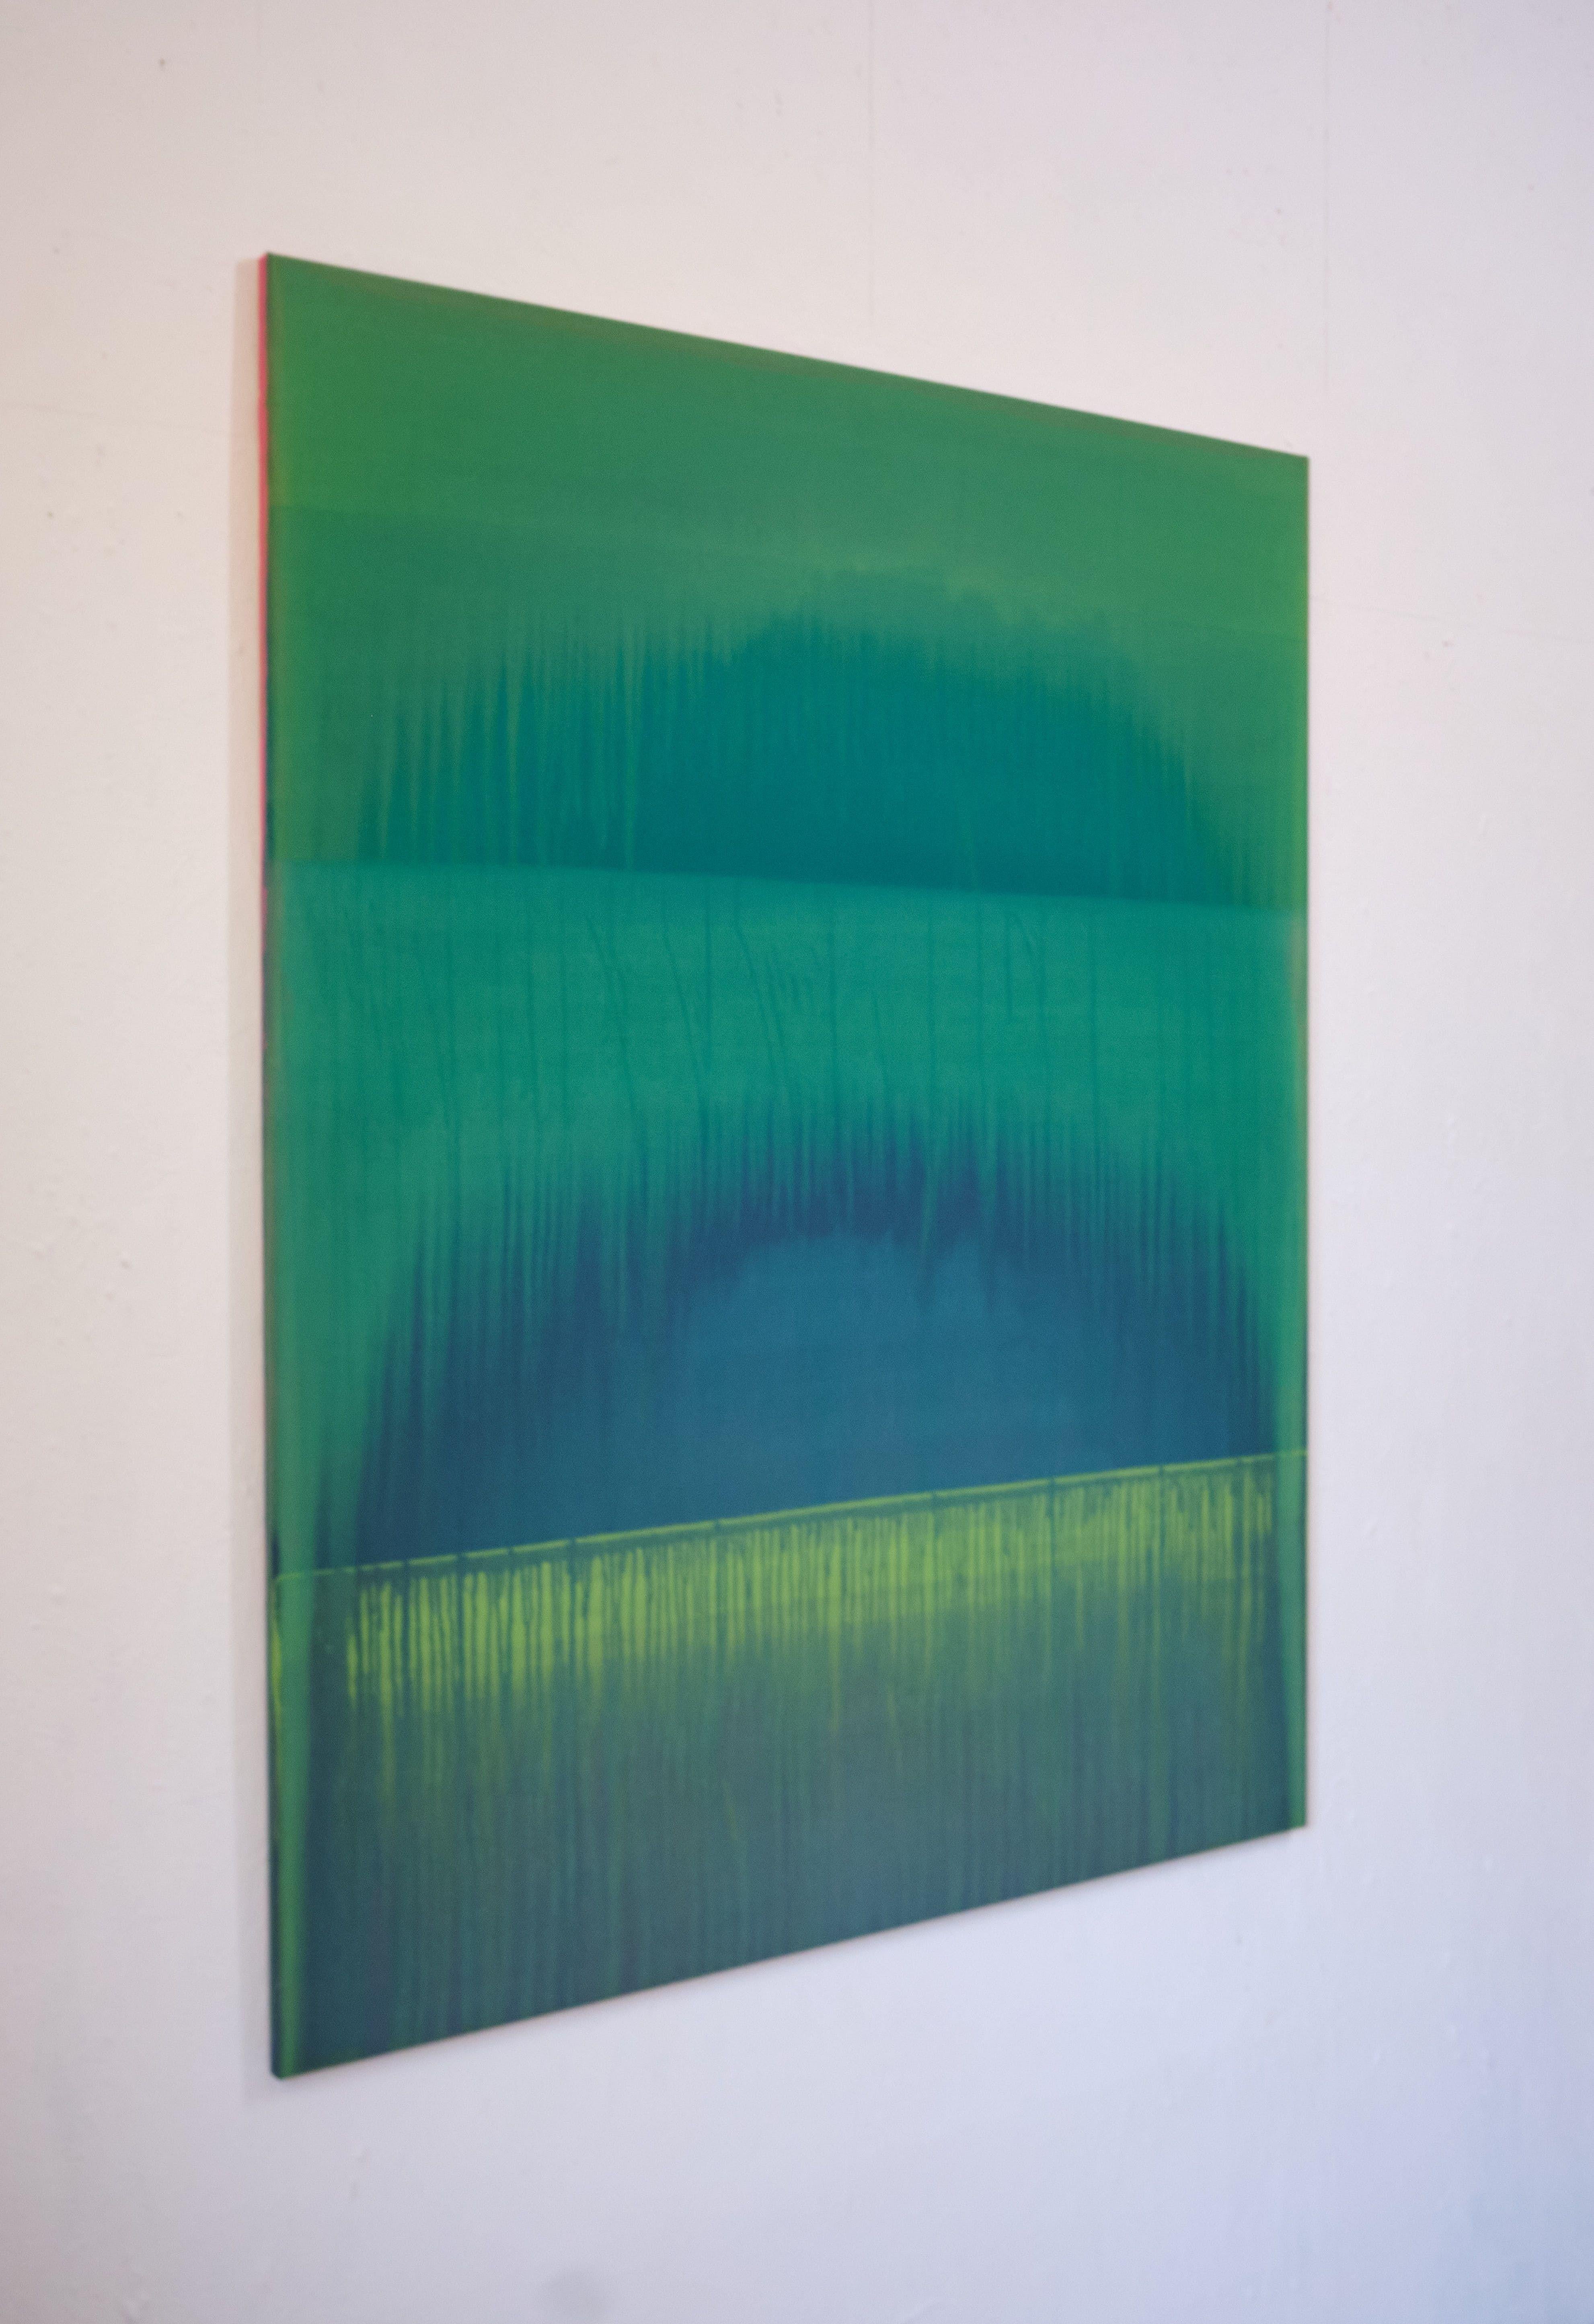 Green arcs flowing over one another, maybe looking out through a cavern at the ocean.  Whilst undertaking the works in this series the artist would think of a motif, or feel the emotion he was feeling. To observe how these thoughts and feelings